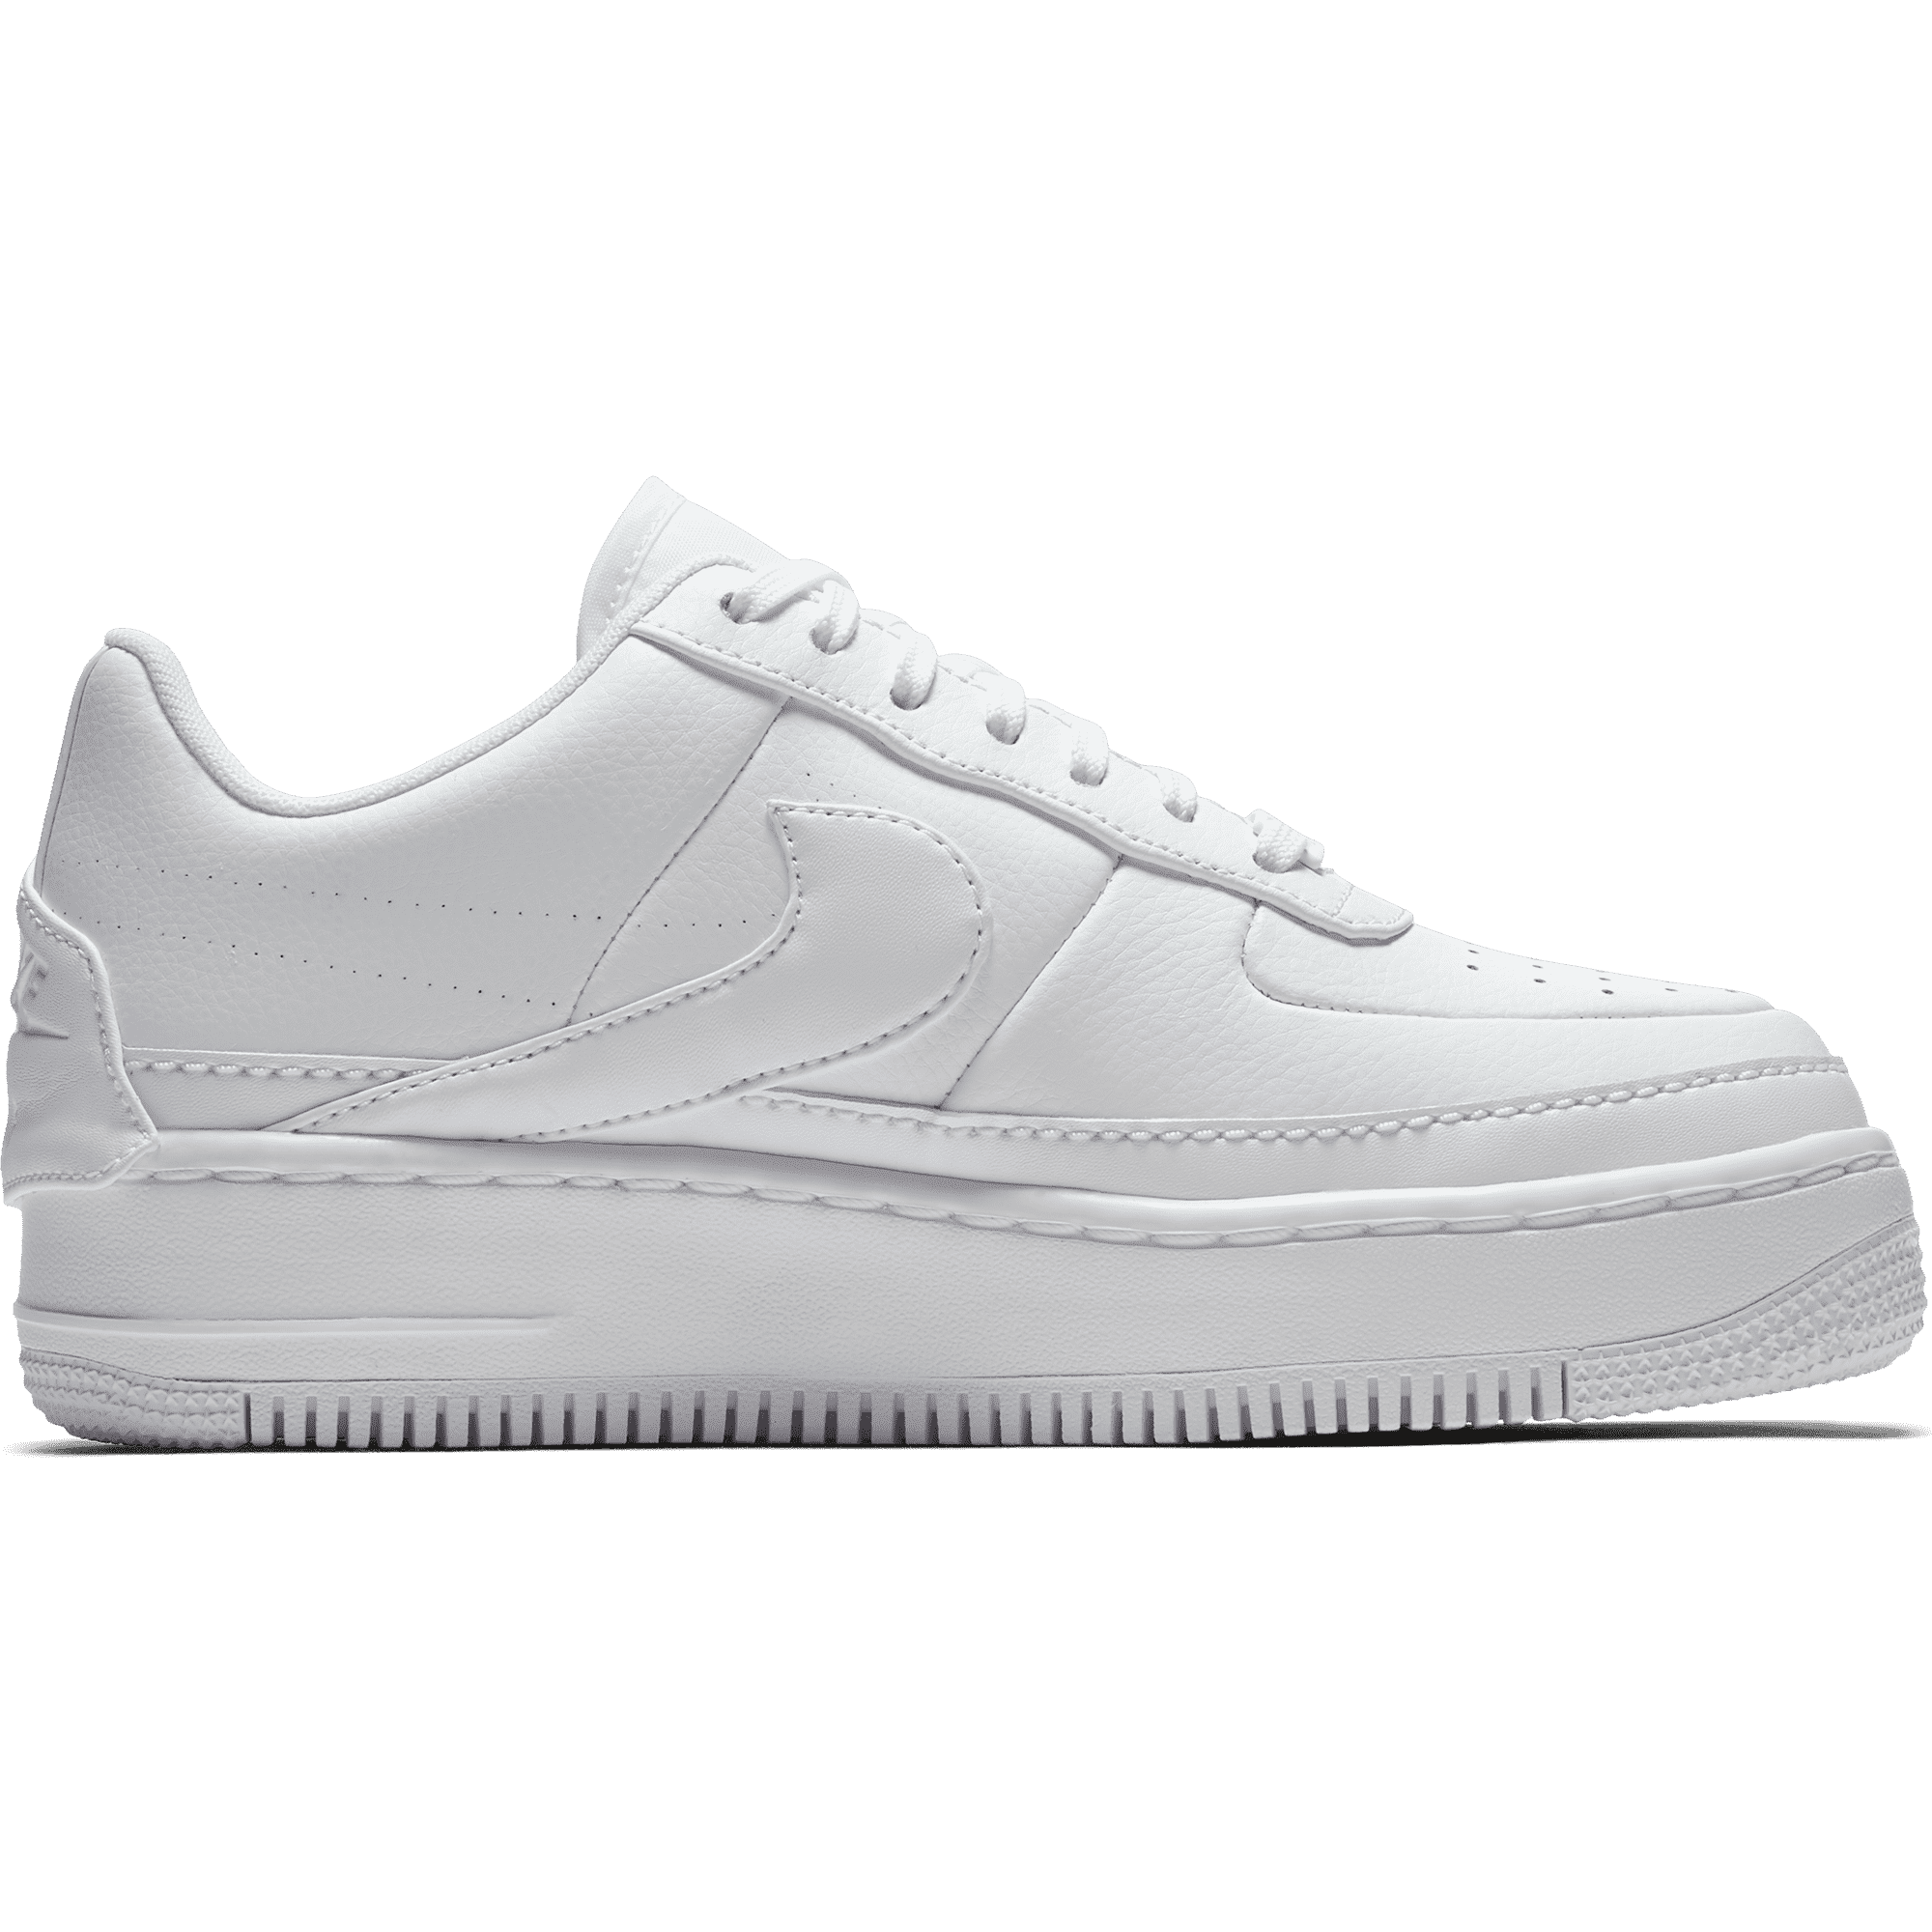 Nike Air Force 1 Jester XX.